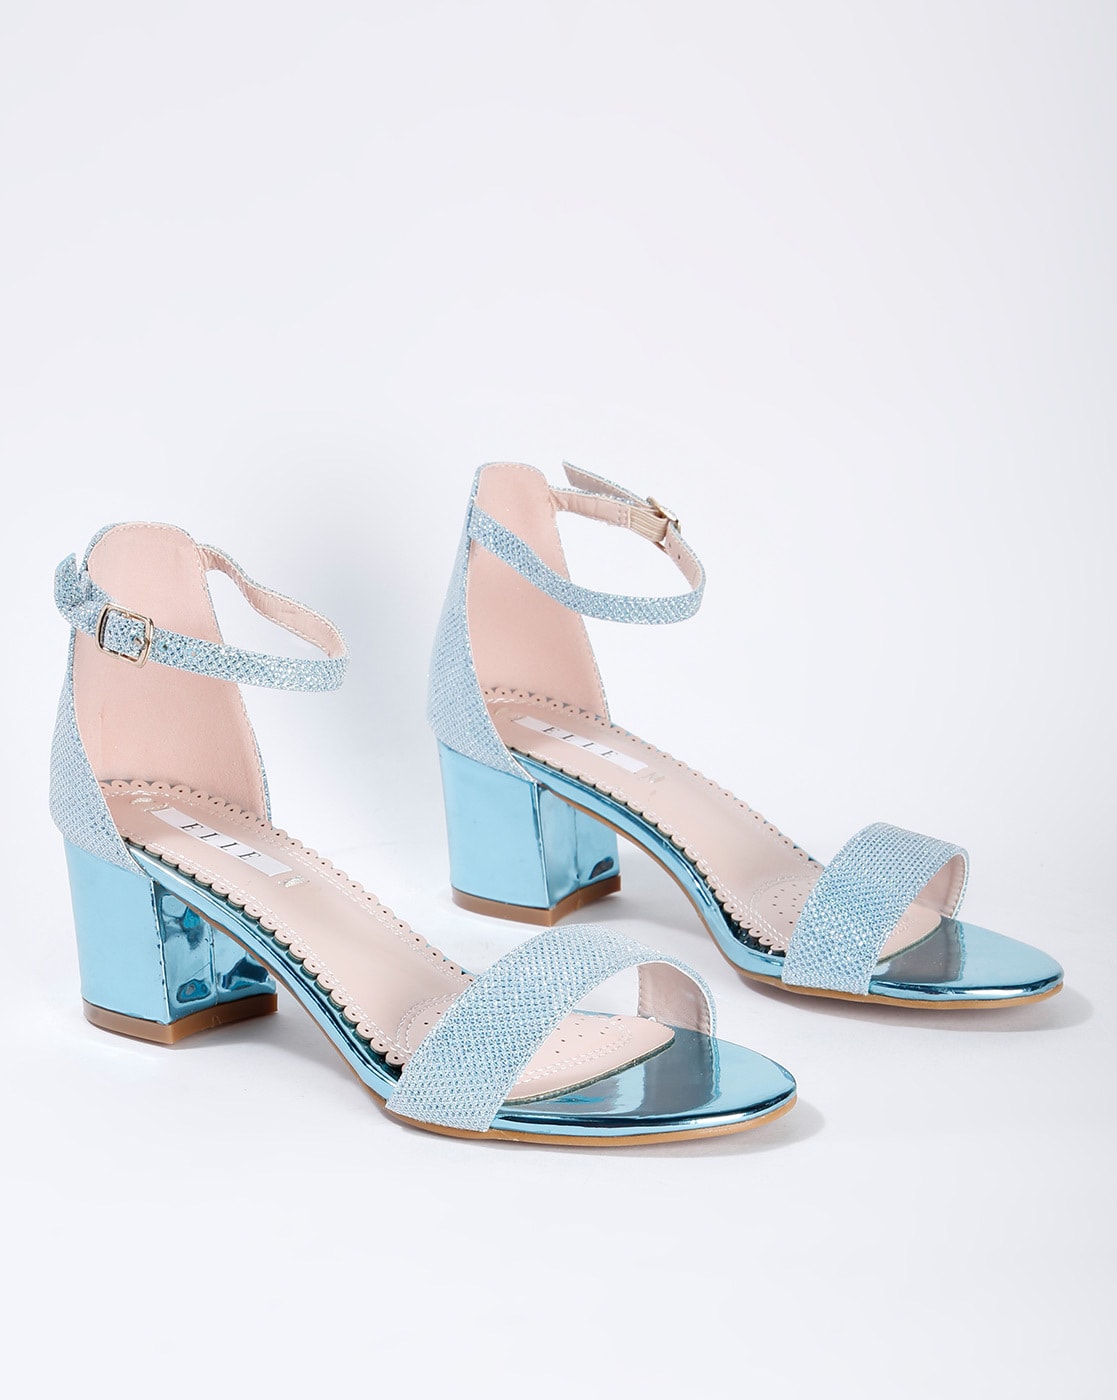 light blue heels with ankle strap